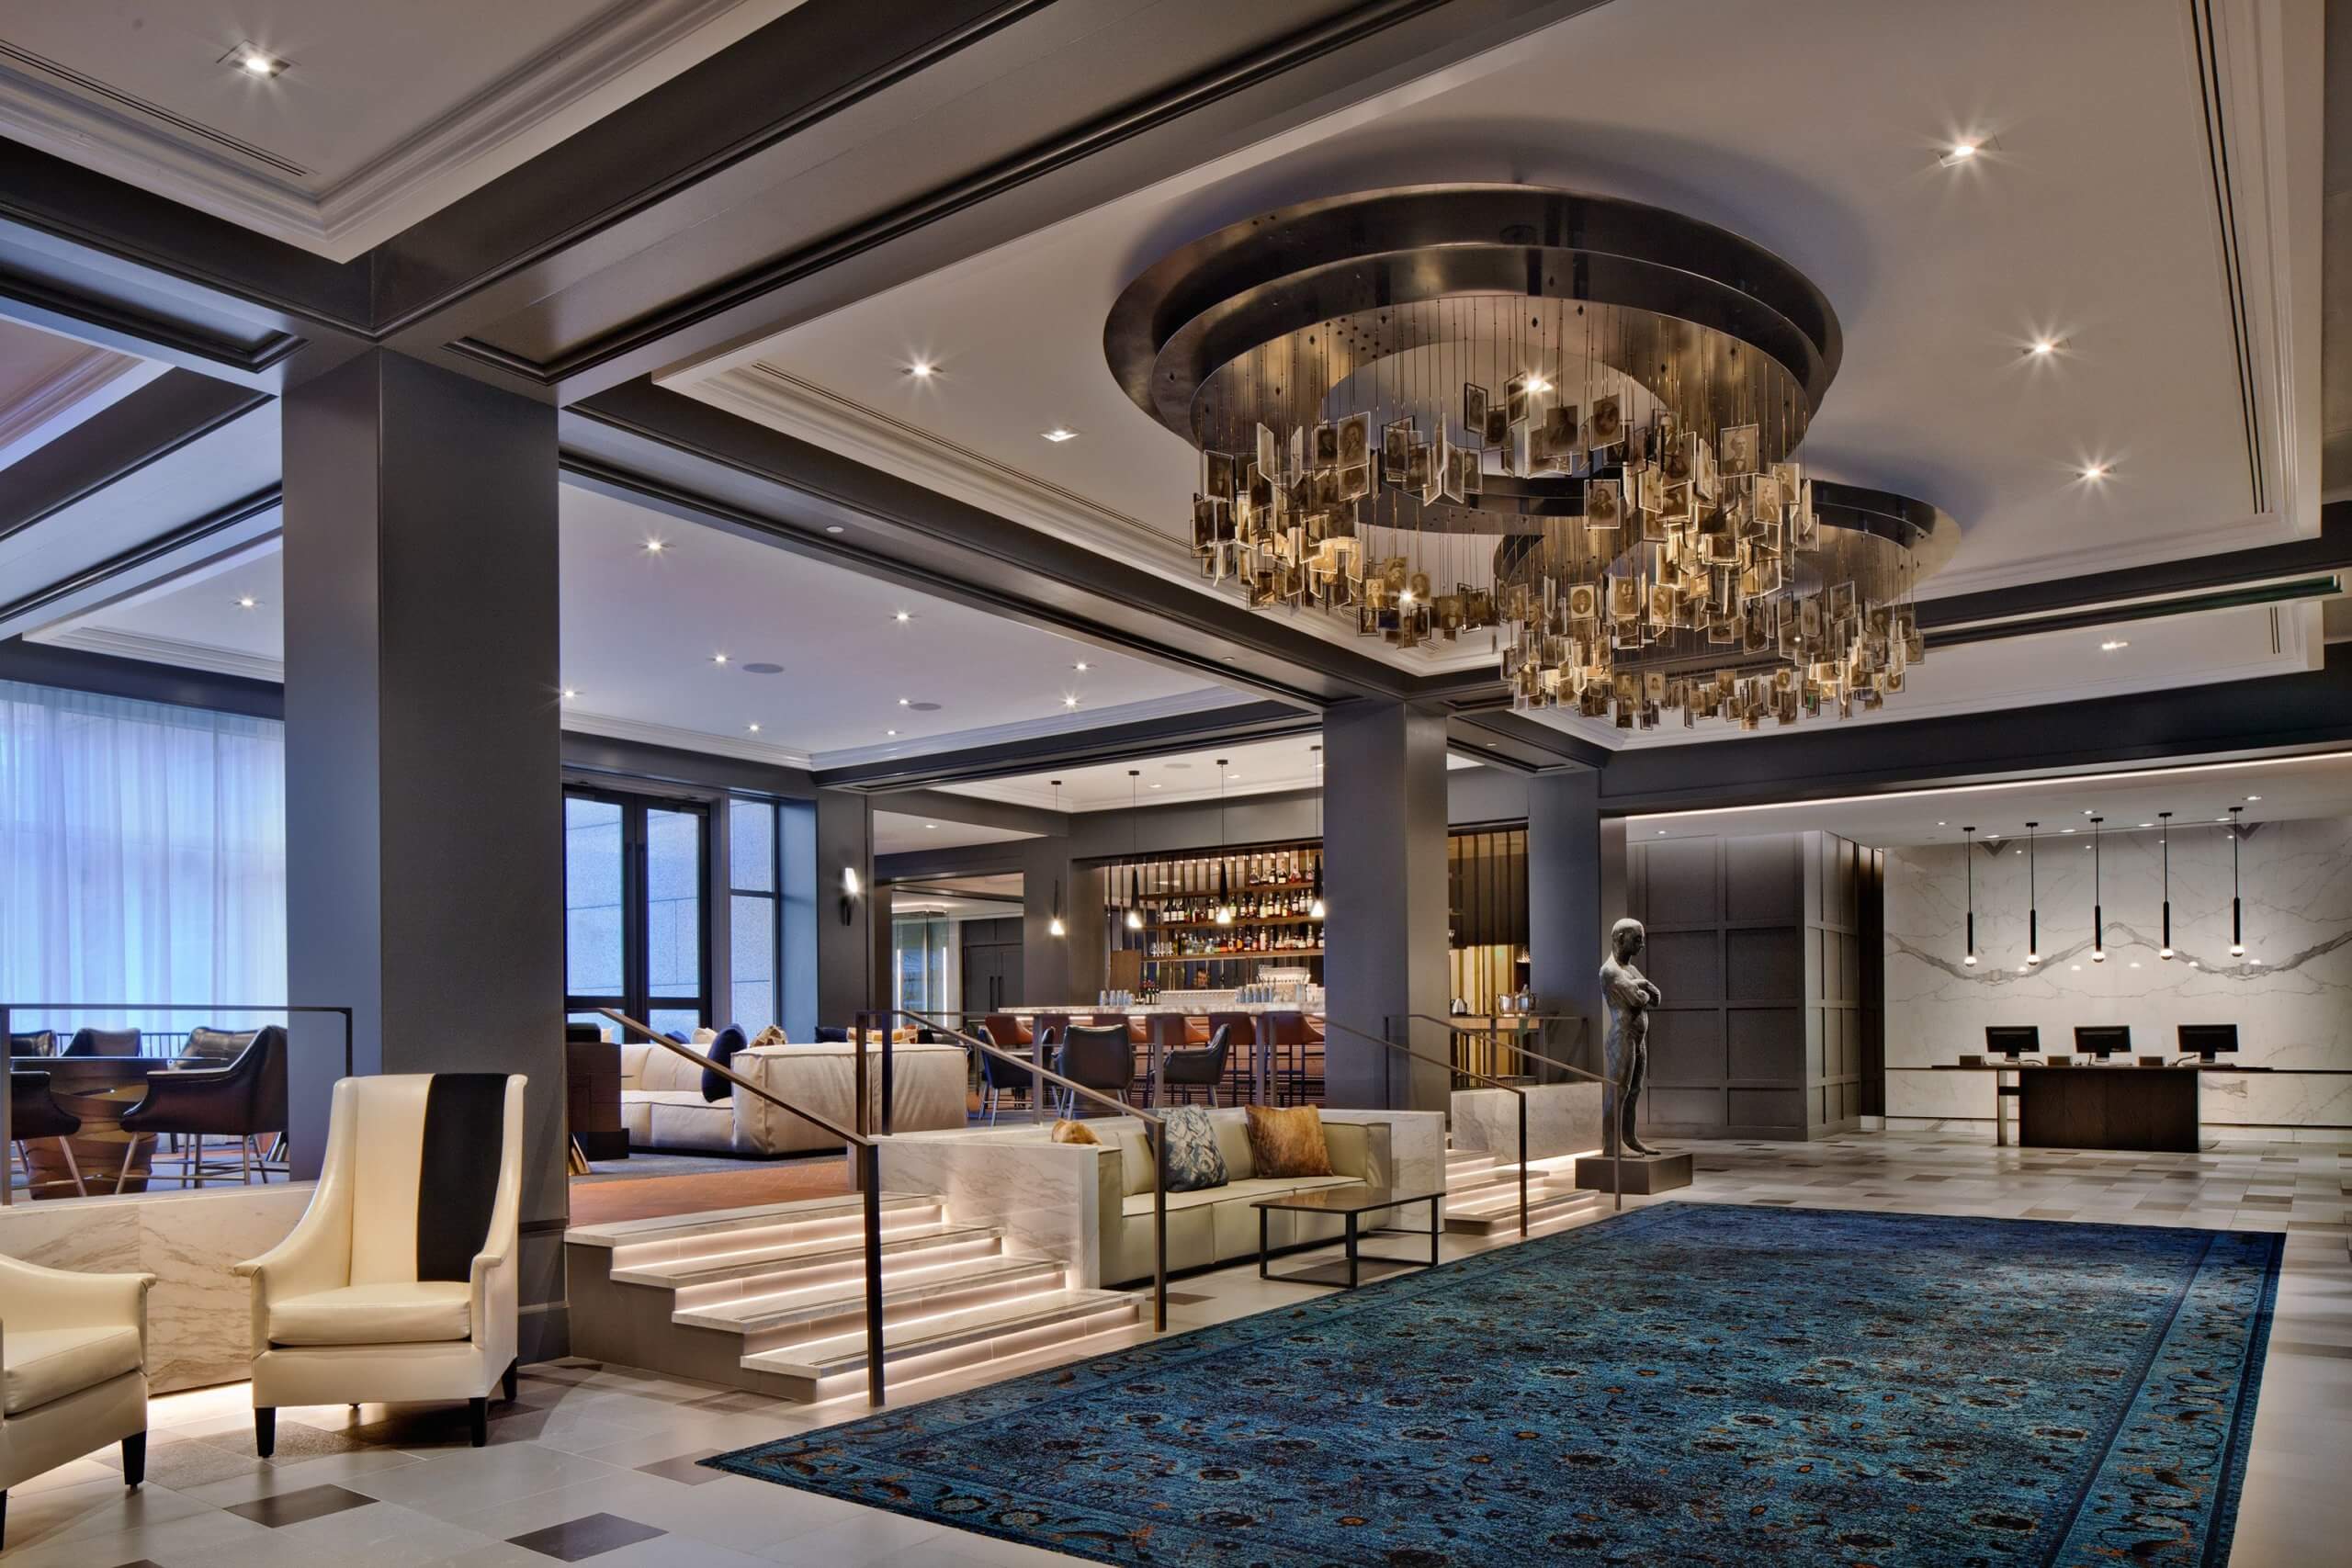 A hotel lobby is shown. There is a large chandelier made of photos hanging from the ceiling. There is a blue carpet underneath. There are a few steps off to the left leading up to another level.